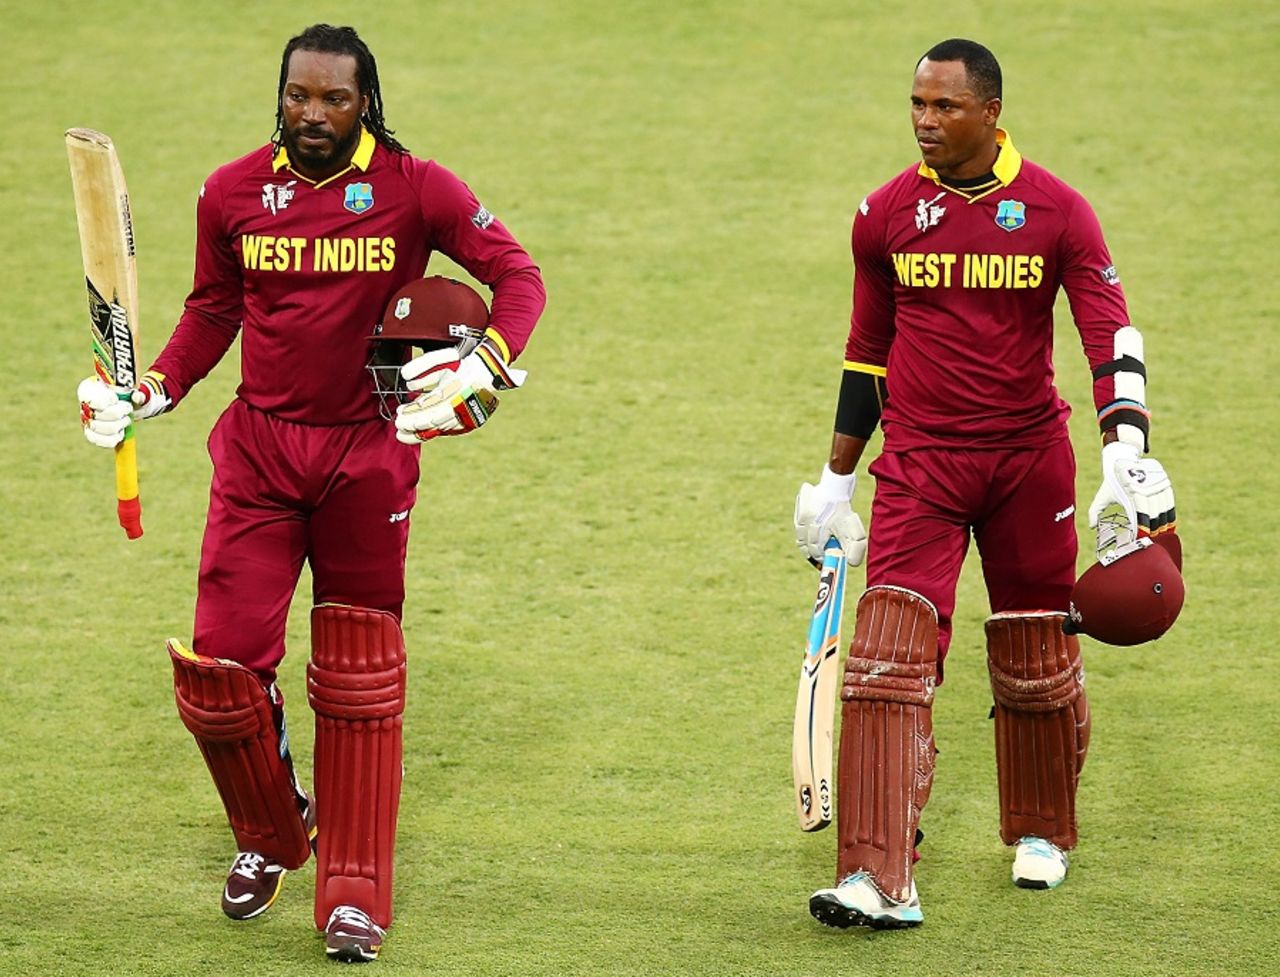 Chris Gayle and Marlon Samuels struck 21 fours and 19 sixes between them, West Indies v Zimbabwe, World Cup 2015, Group B, Canberra, February 24, 2015